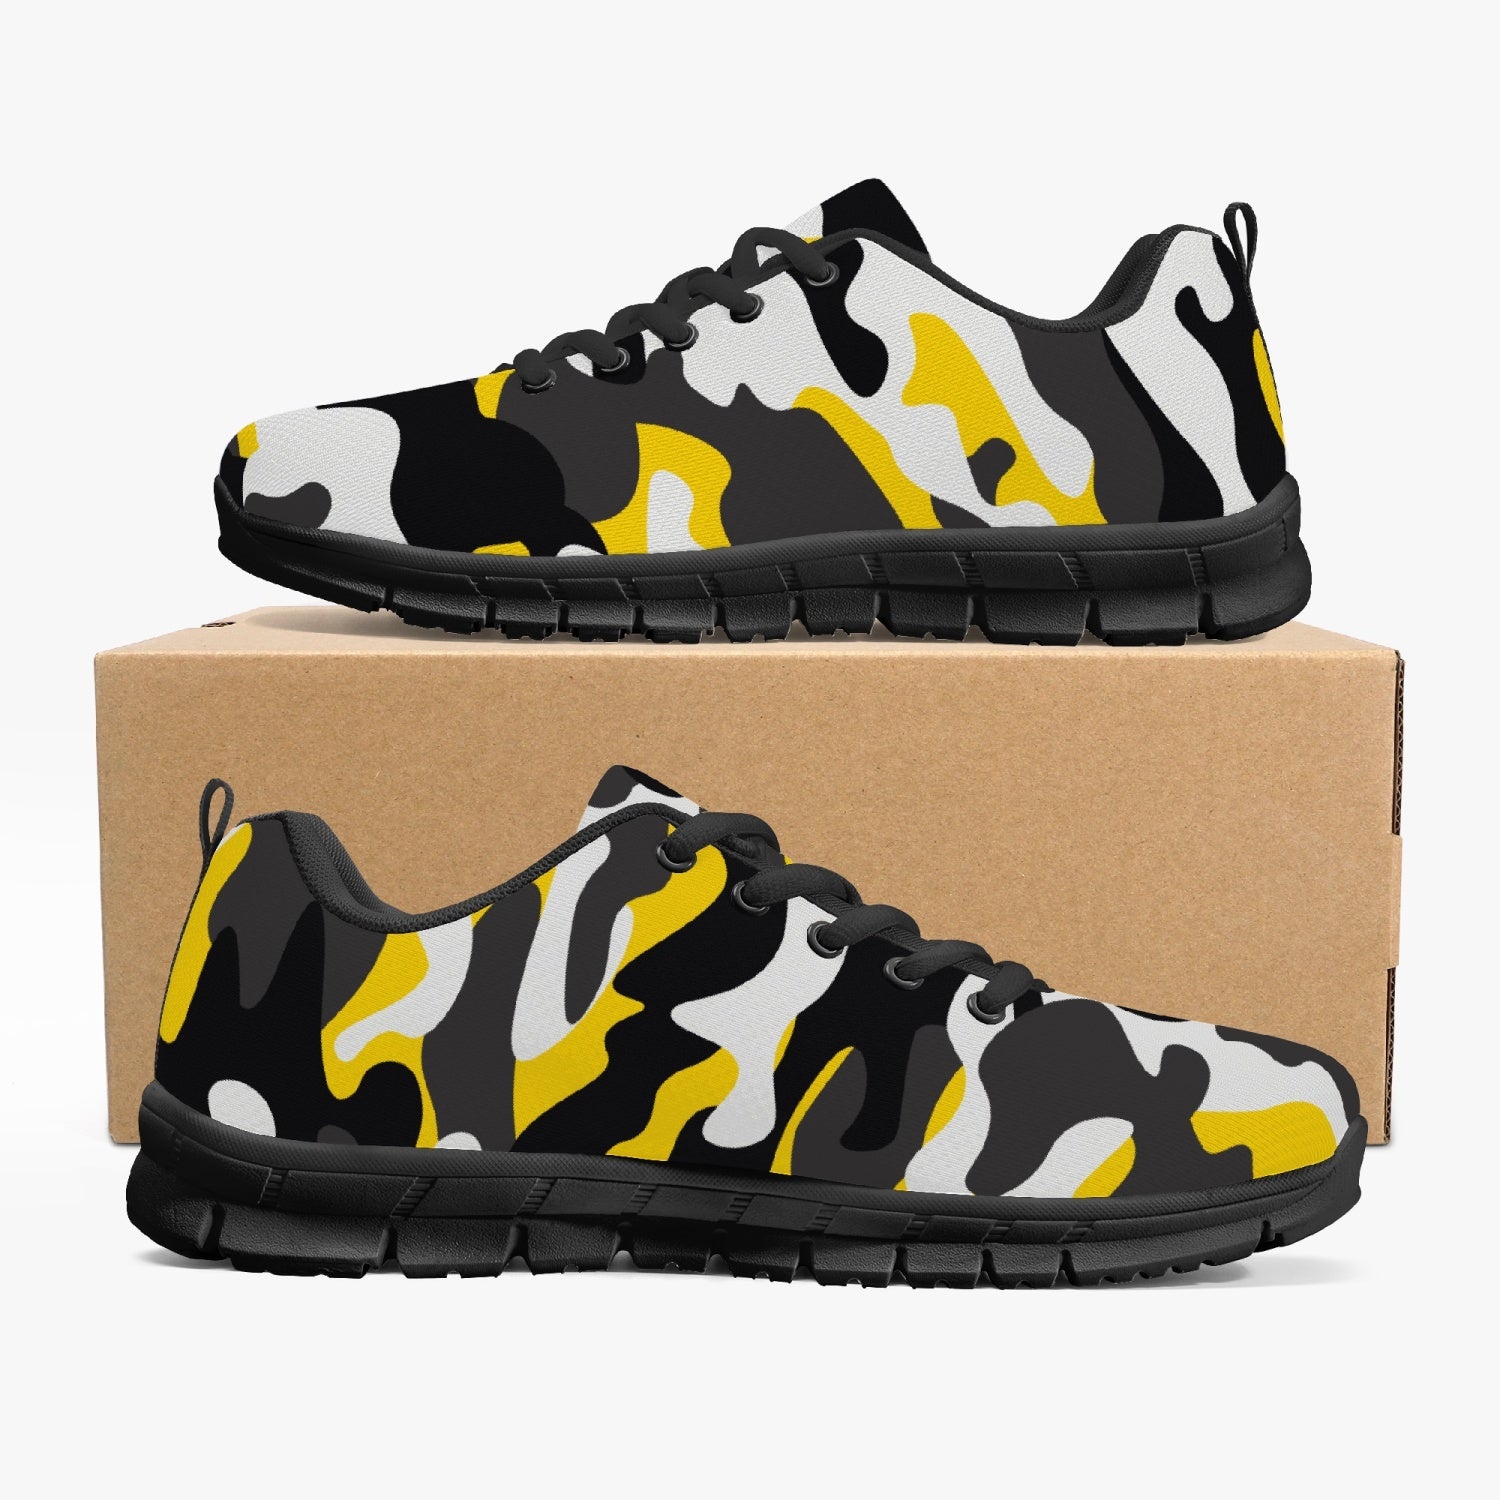 Women's Urban Jungle Yellow White Black Camouflage Running Shoes Sneakers